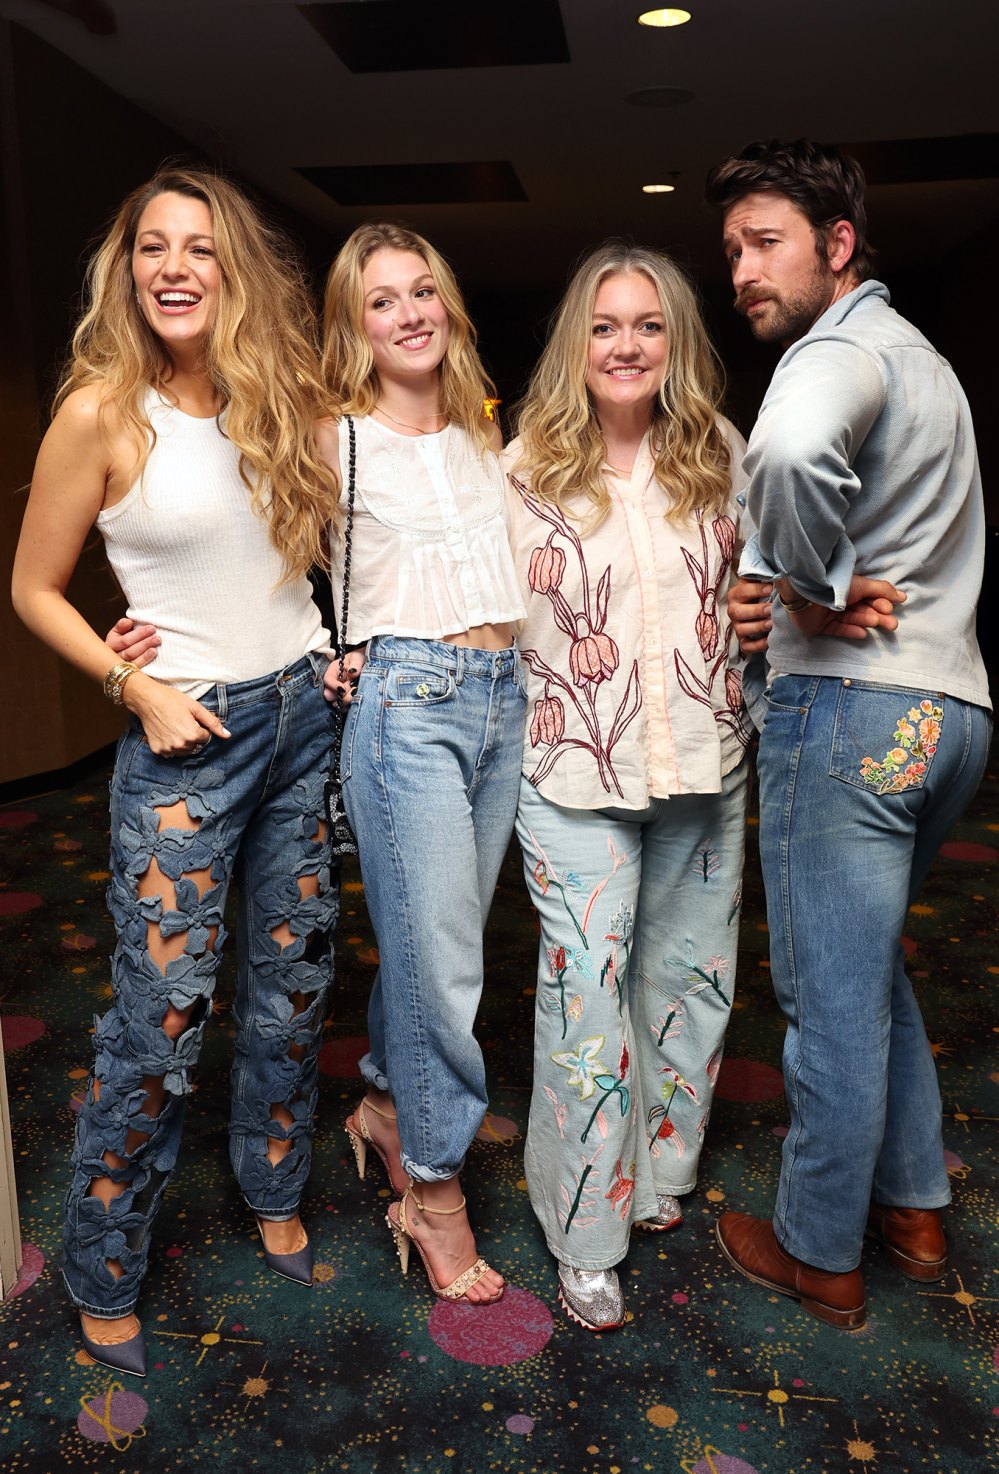 Blake Lively Handmade Her Costar’s Floral Jeans at ‘It Ends With Us’ Early Preview